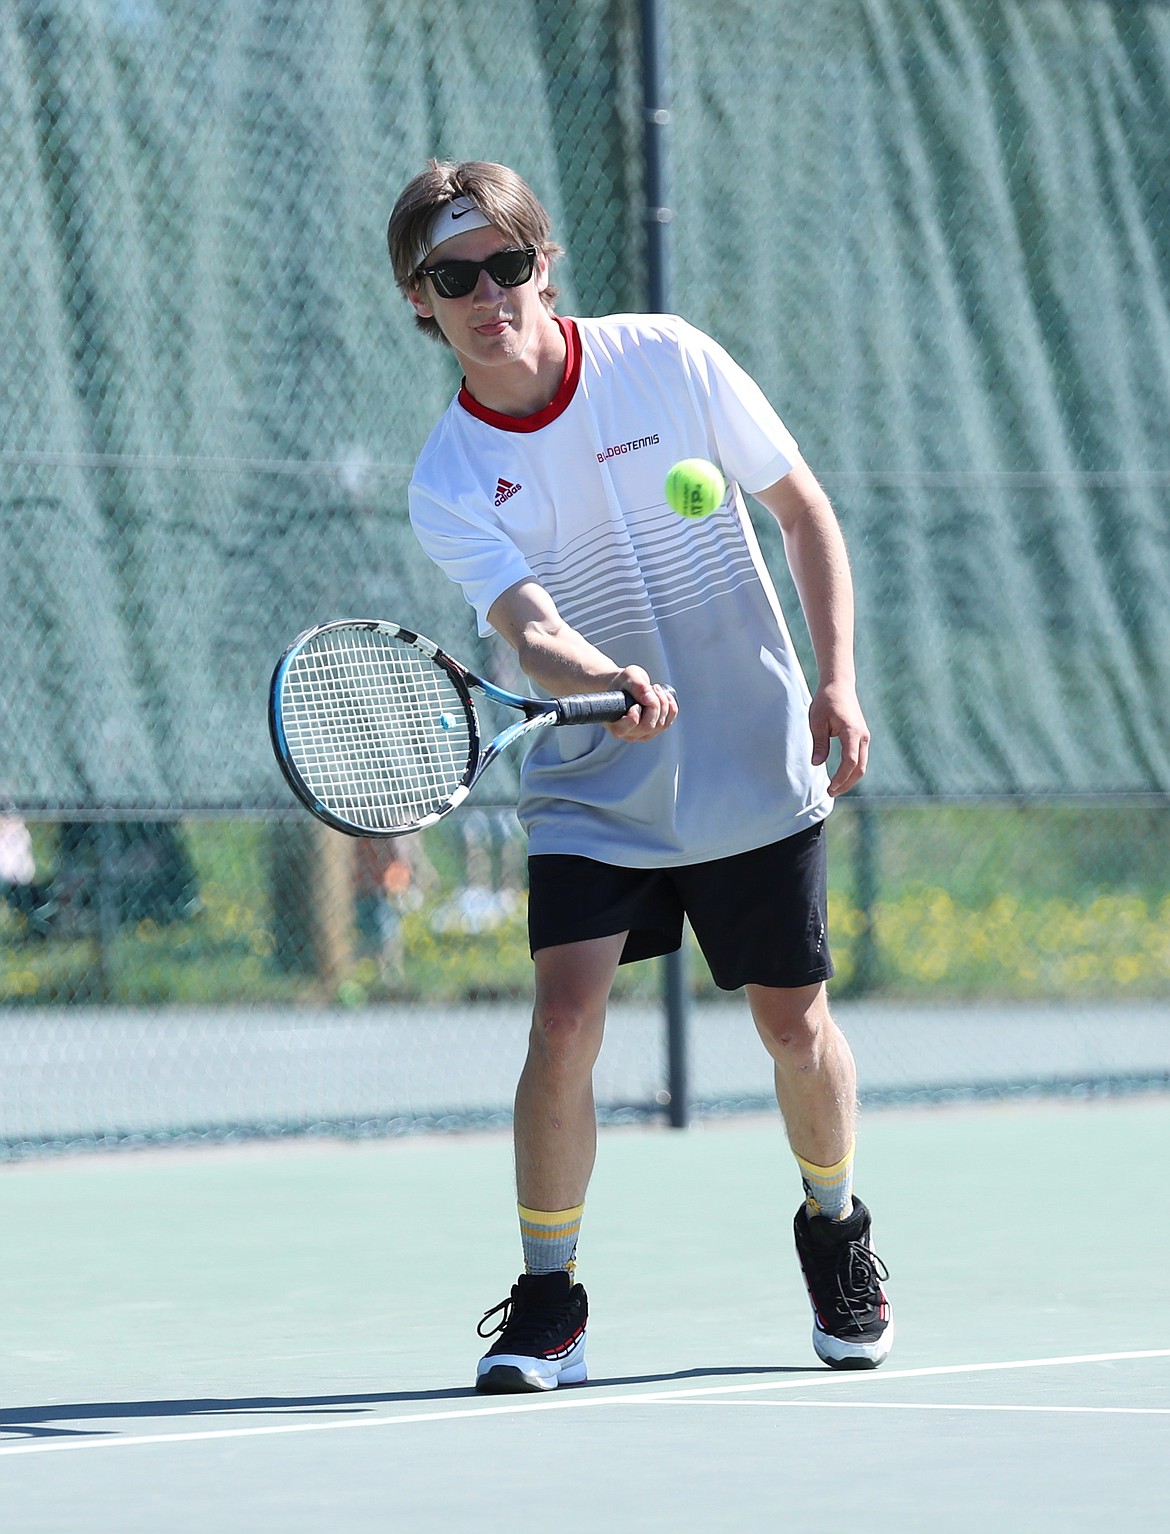 Tyler McNamee returns a serve during the mixed doubles regional championship match on Saturday at Travers Park.